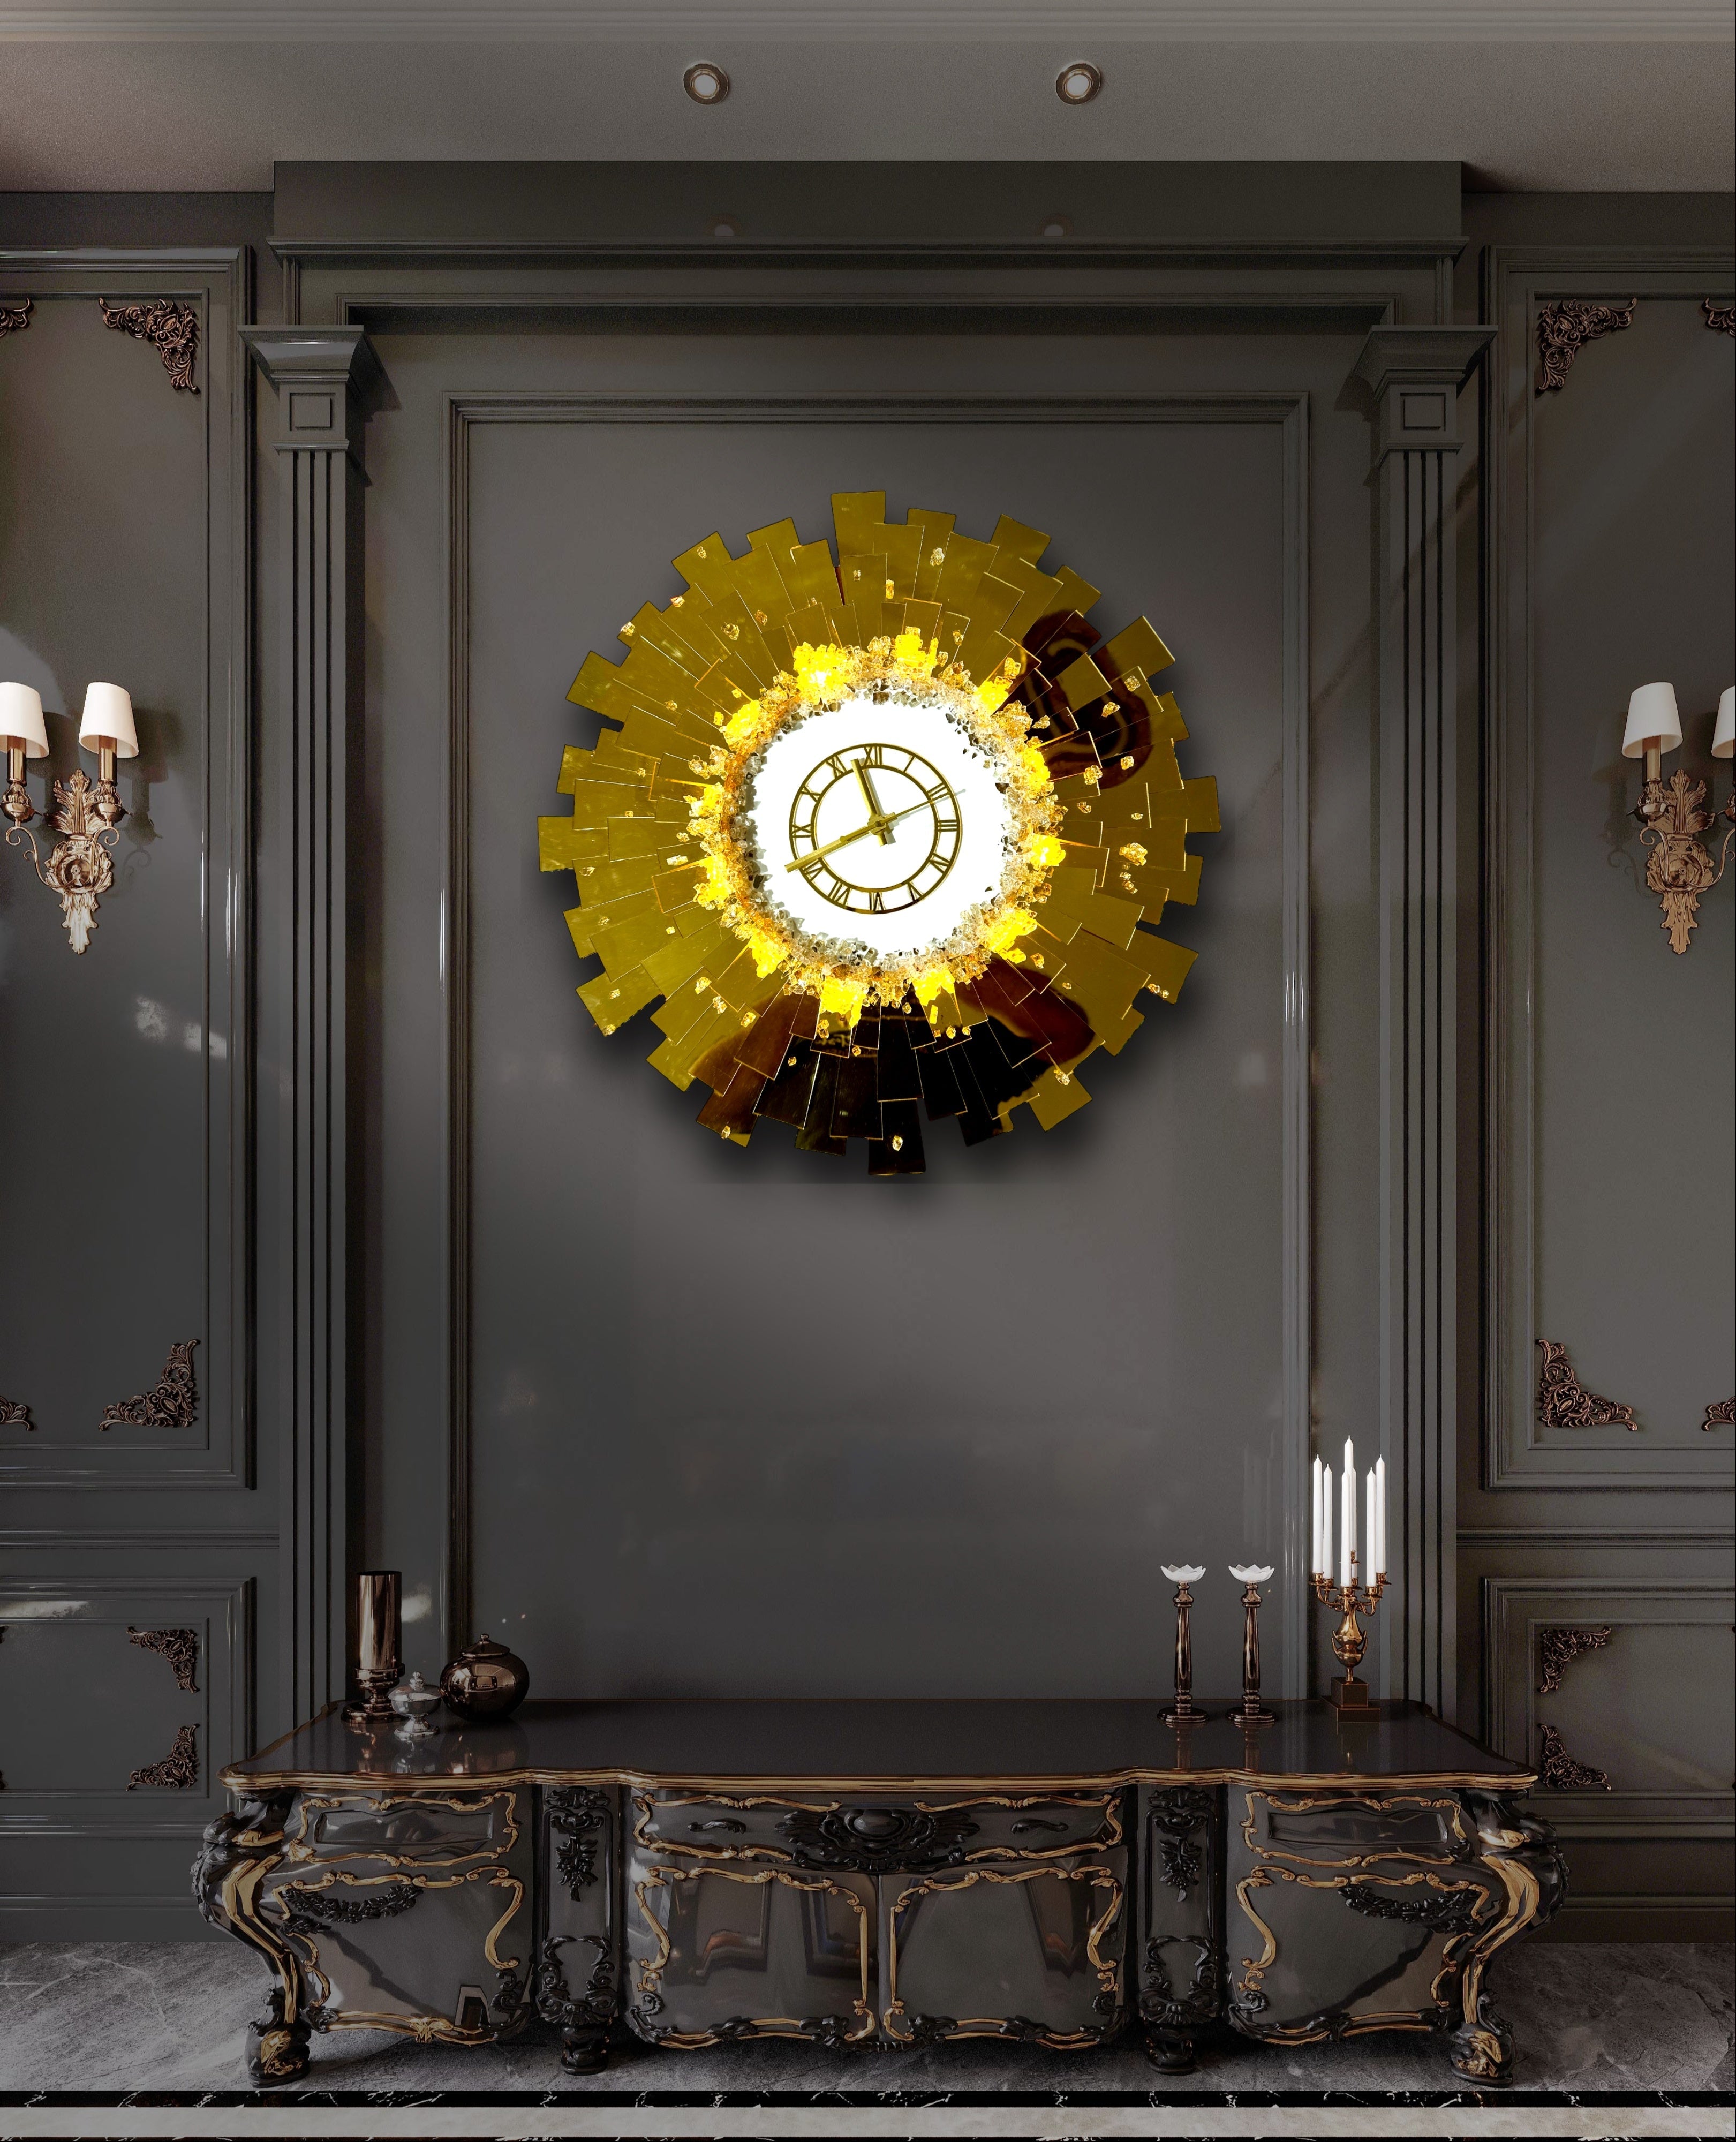 The Wall Clock: A Symphony of Acrylic, Crystals, and Light